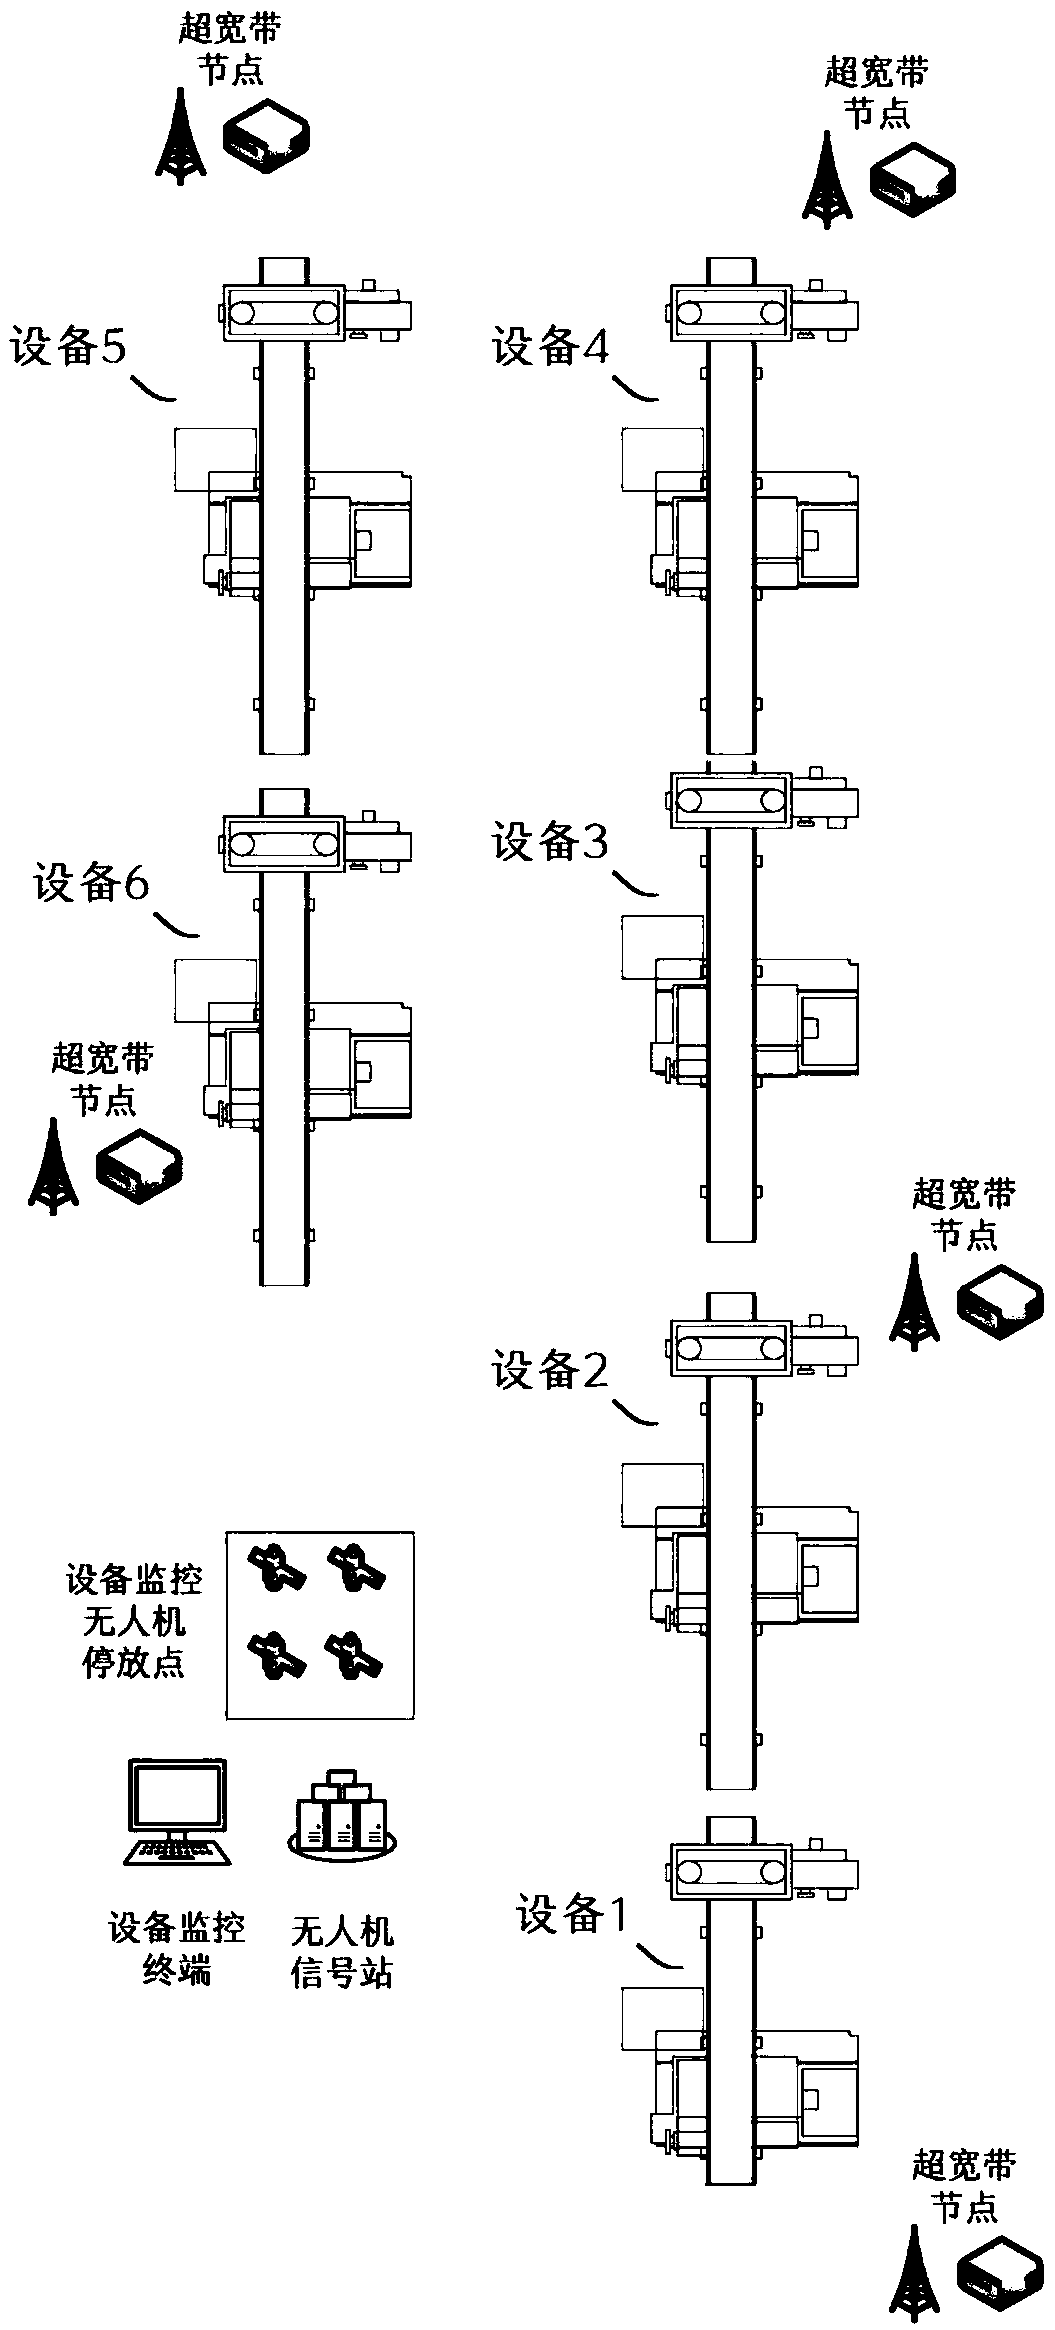 Unmanned aerial vehicle equipment monitoring system and method